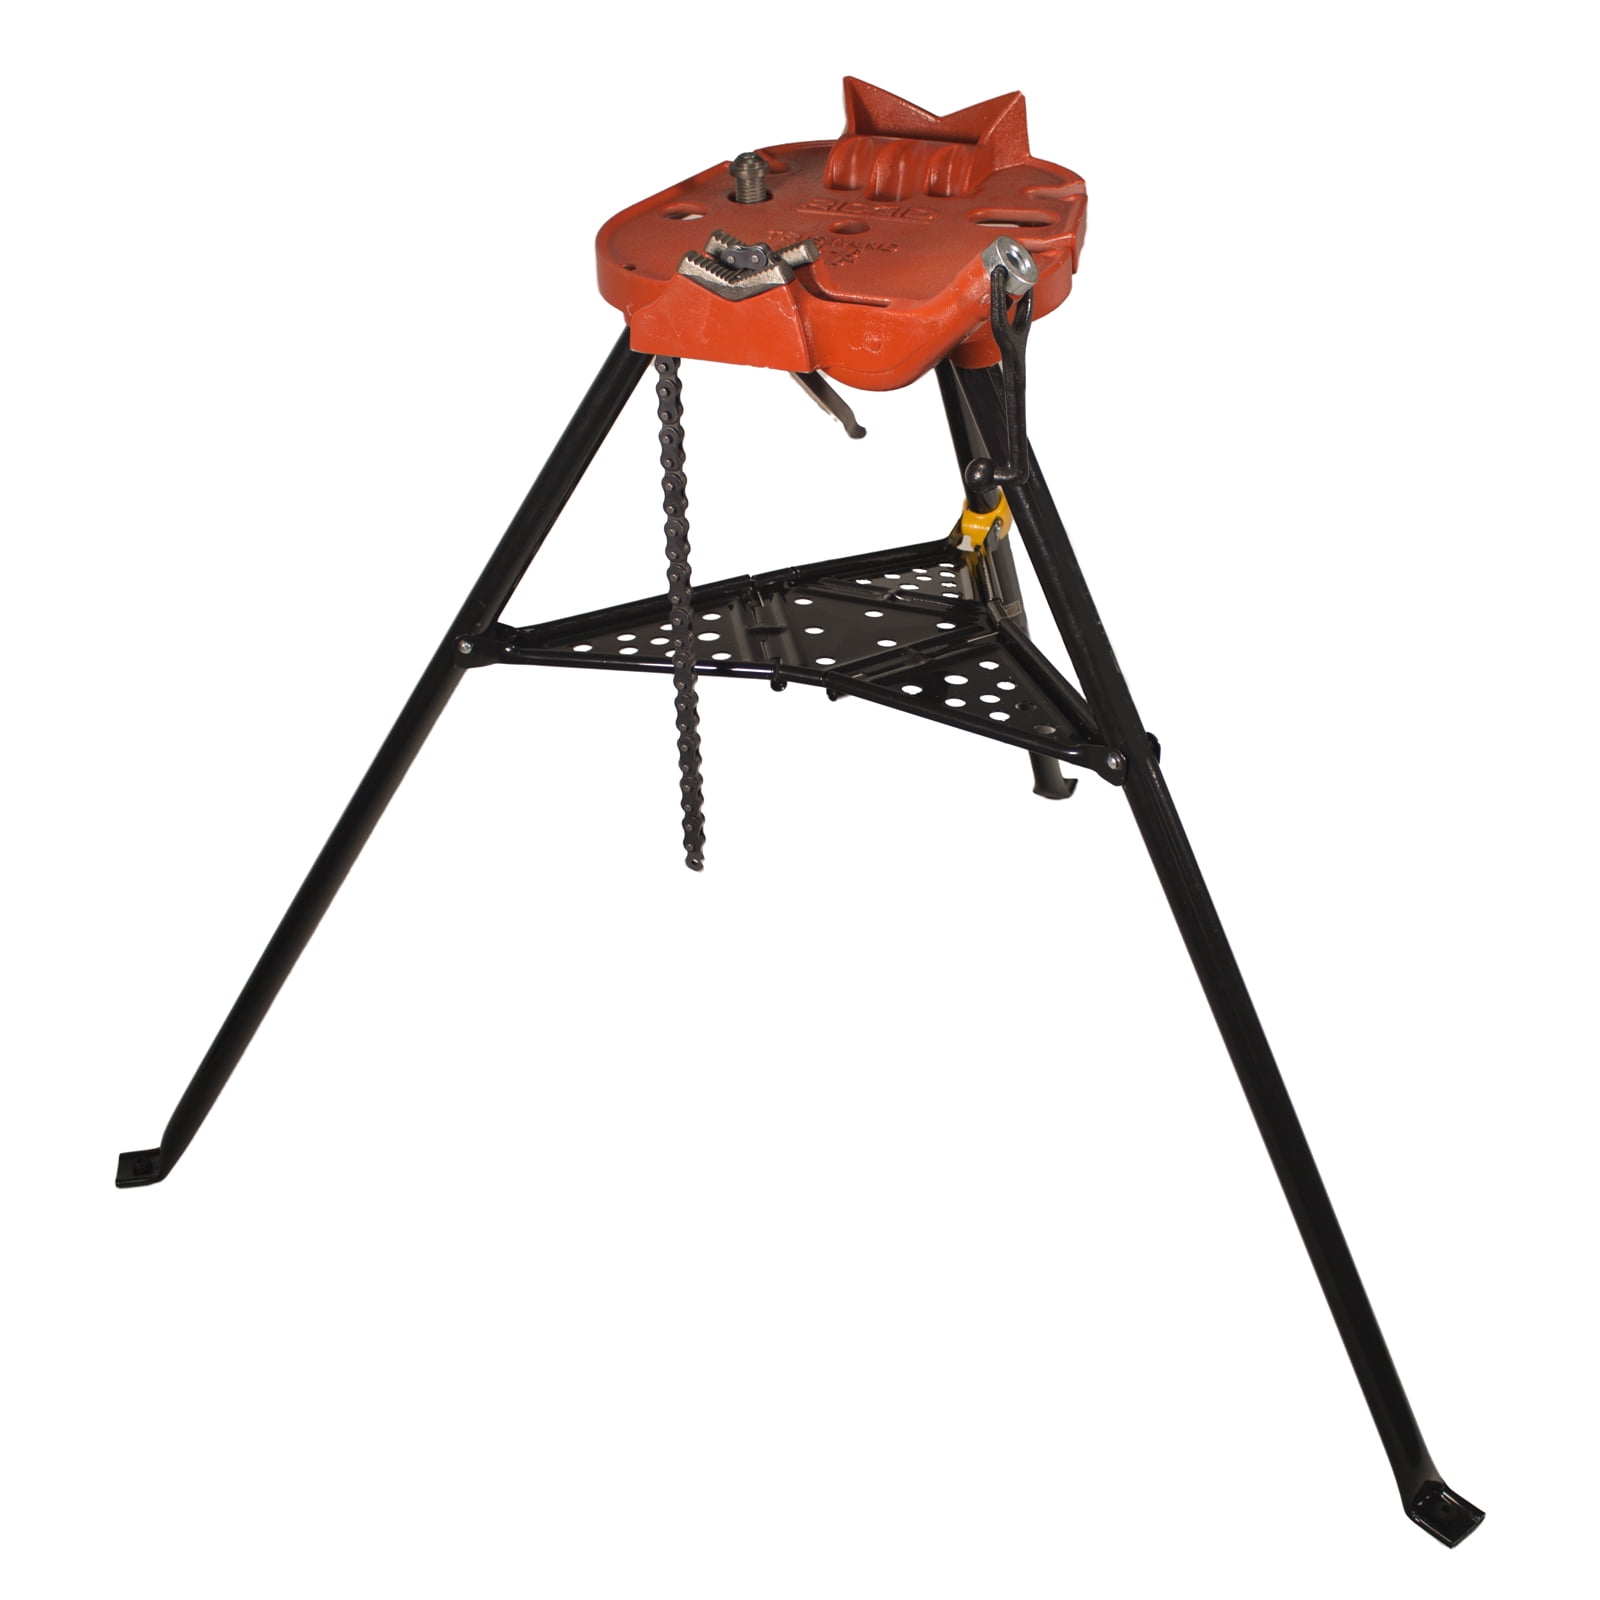 Pre-Owned RIDGID® 460-6 Portable TRISTAND® Chain Vise Stand 36273 (Like New)